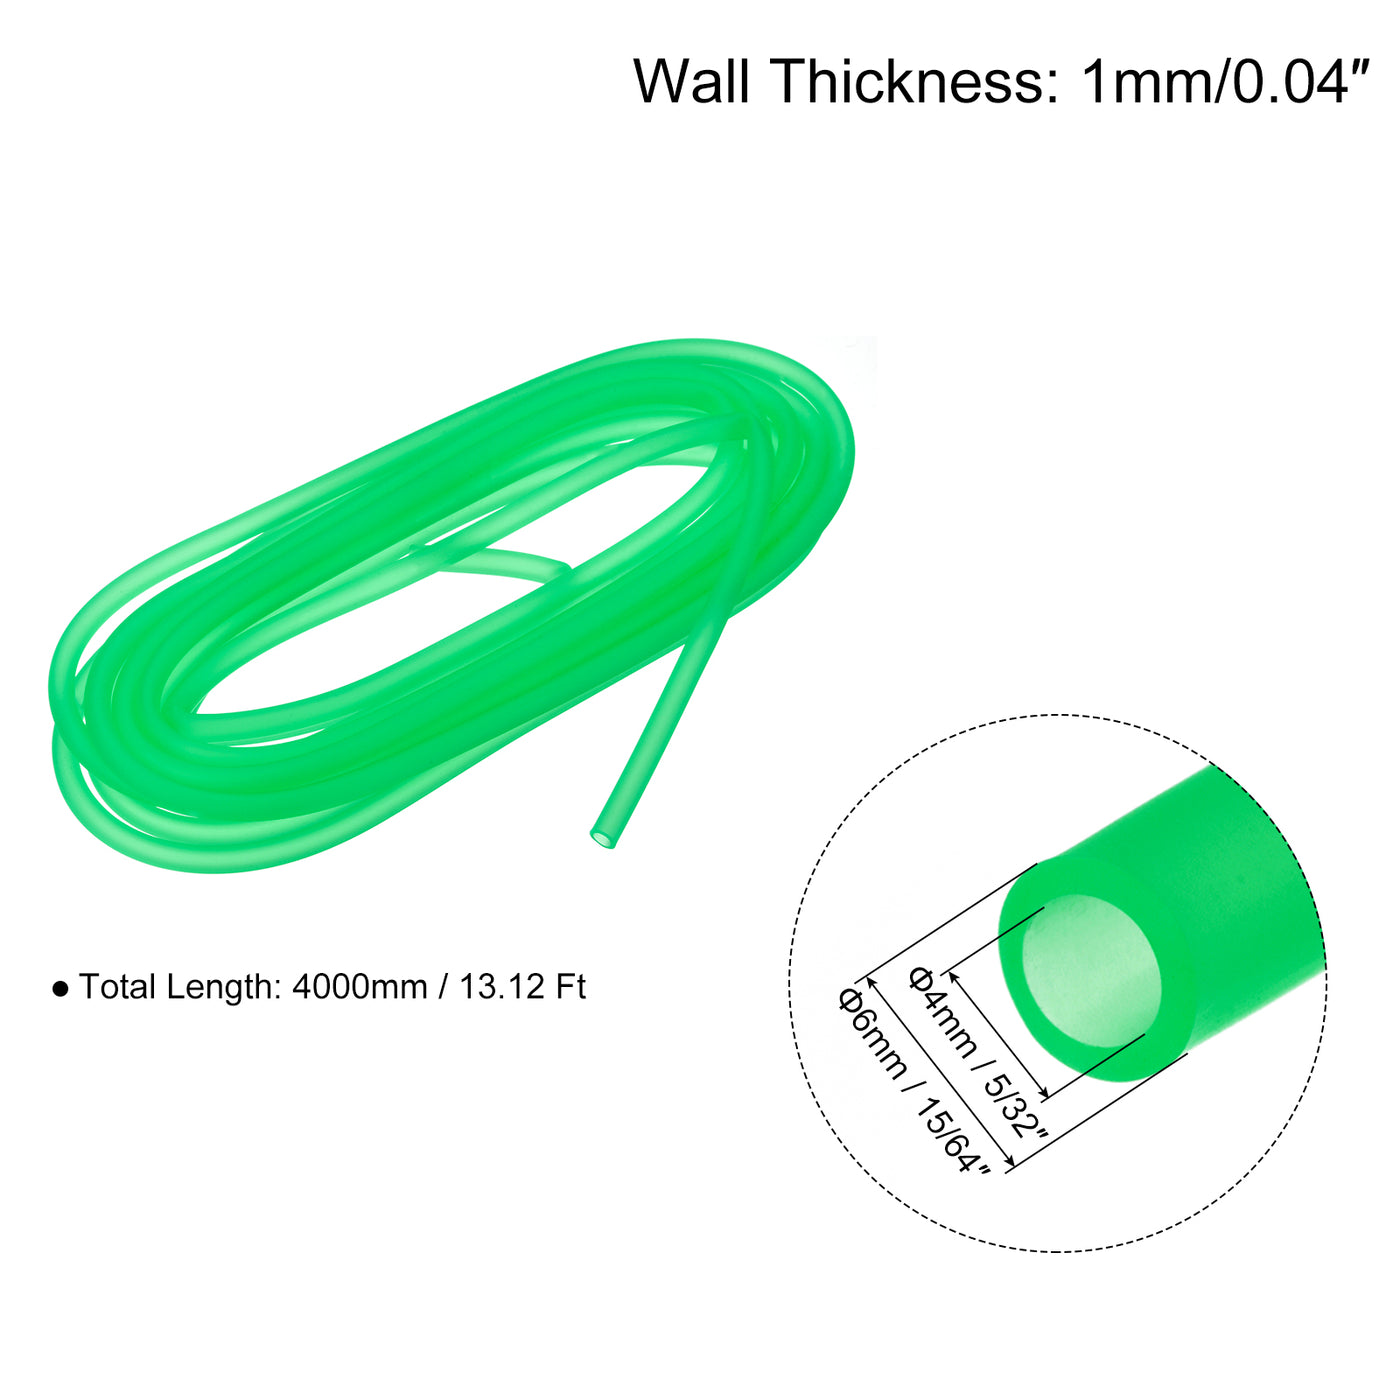 uxcell Uxcell Silicone Tubing 5/32" ID, 15/64" OD 4Pcs 13.12 Ft for Pump Transfer, Grass Green